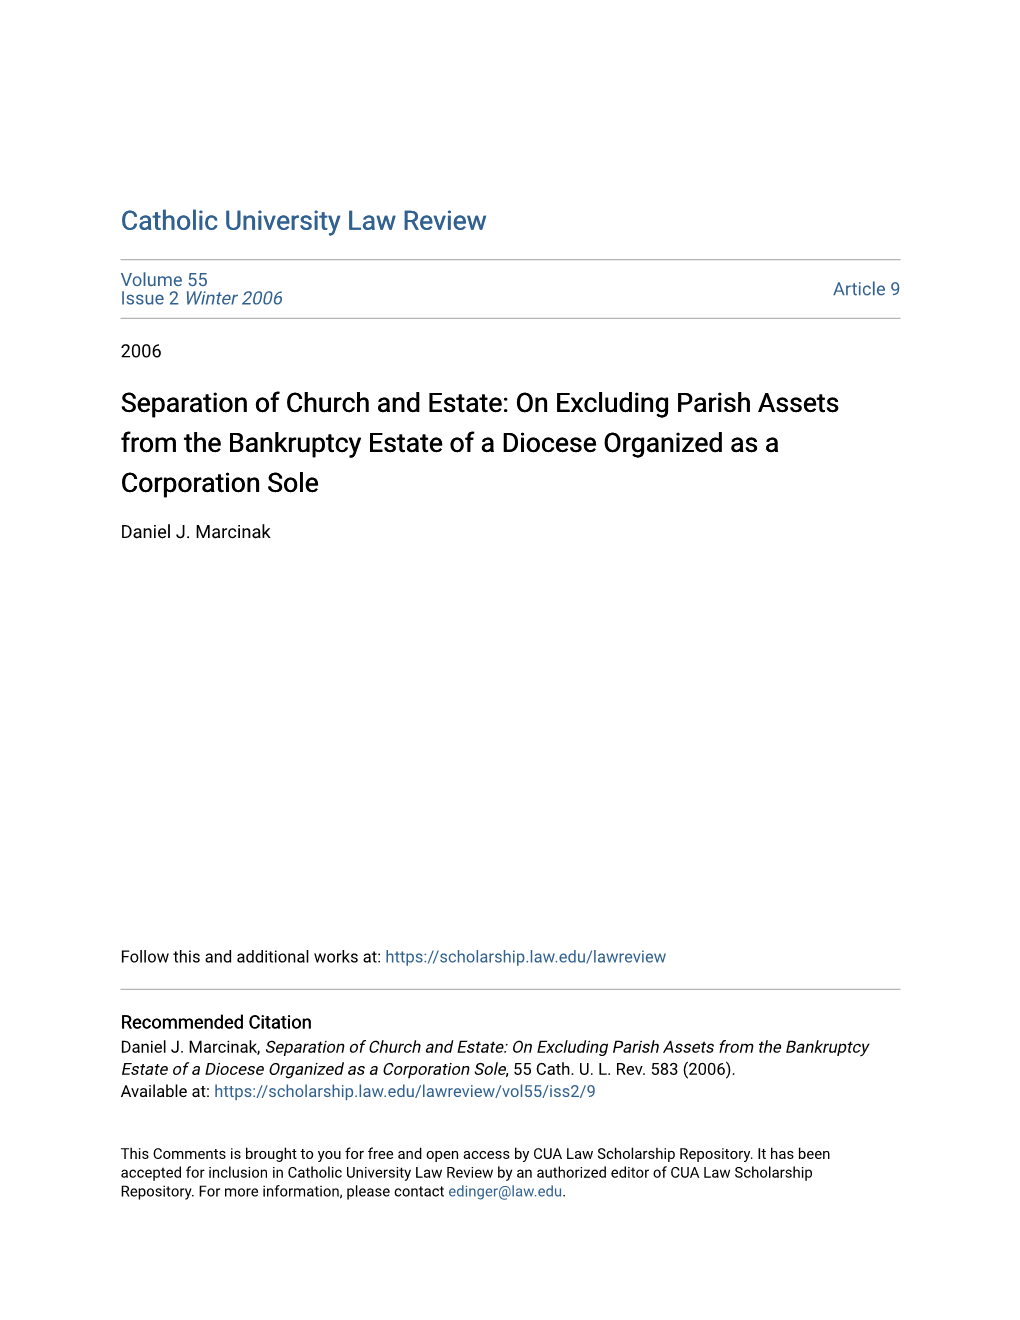 On Excluding Parish Assets from the Bankruptcy Estate of a Diocese Organized As a Corporation Sole